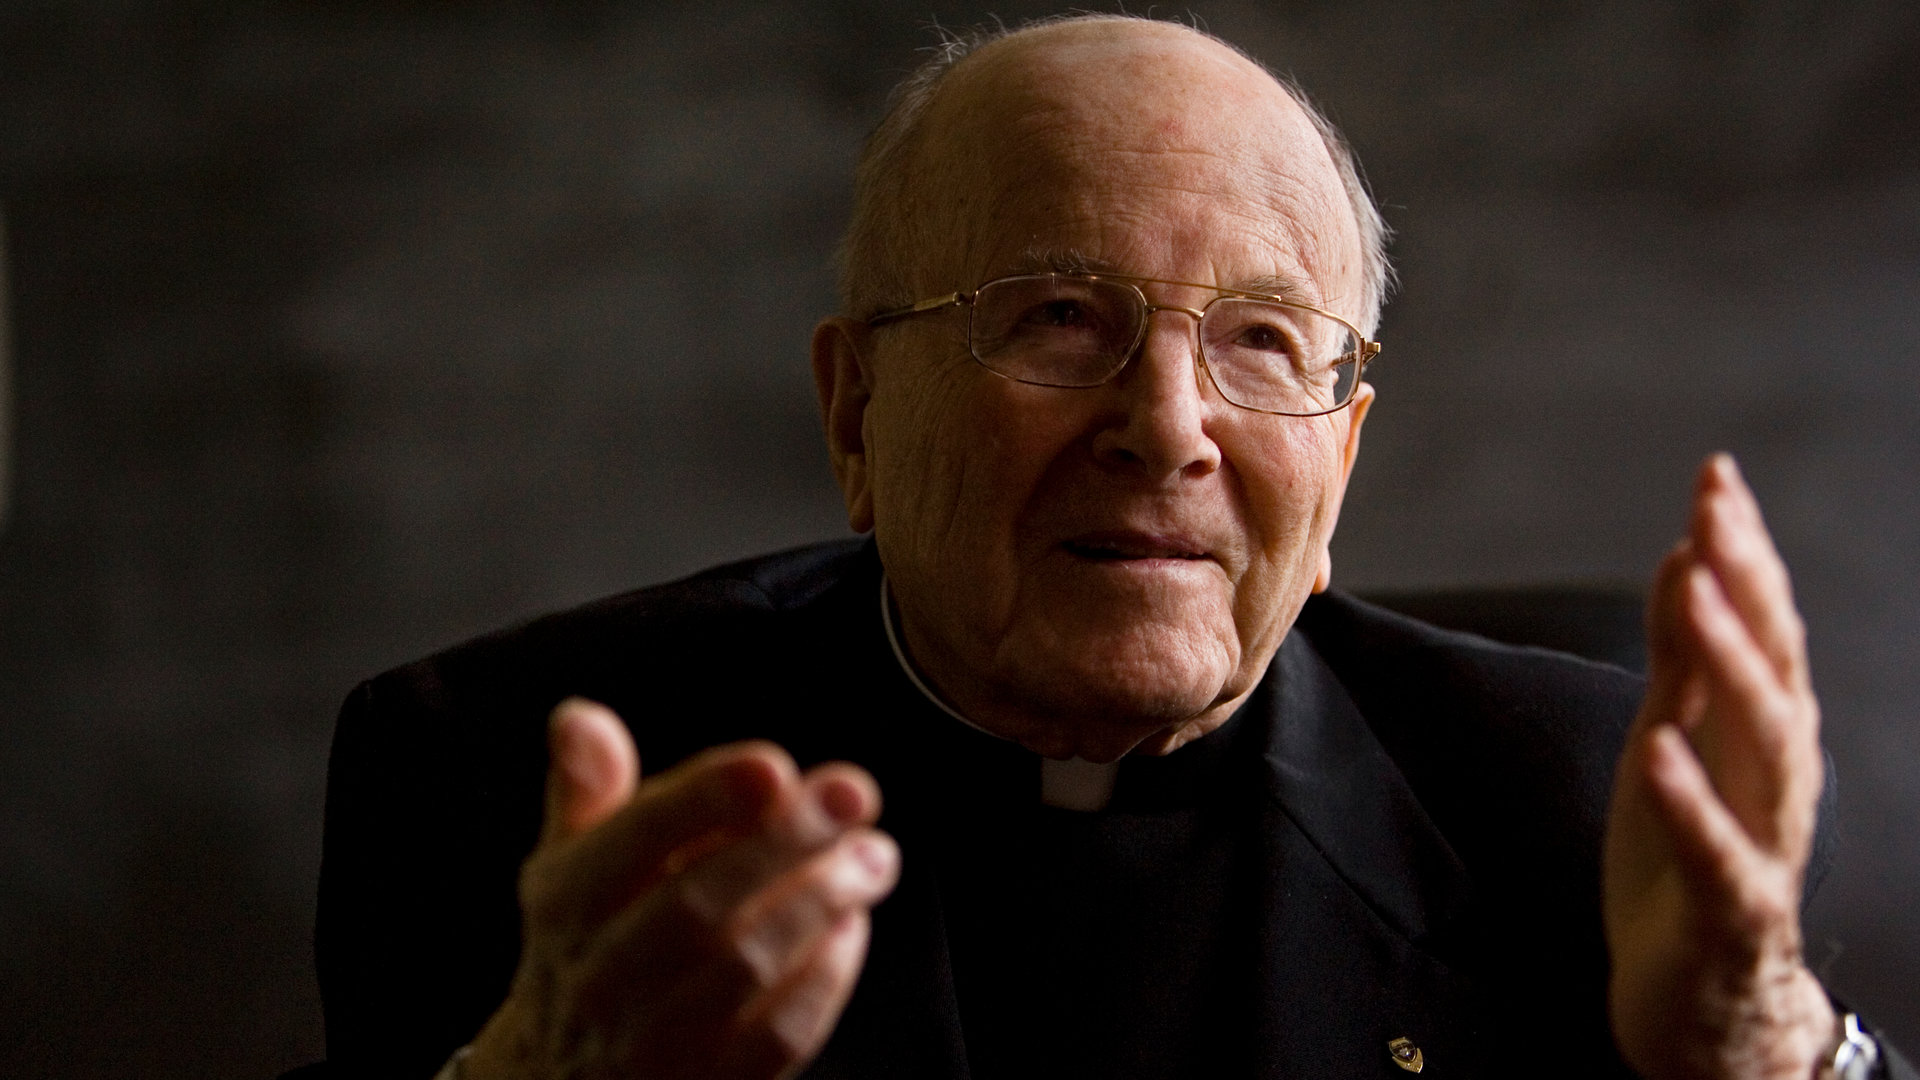 Fr. James Lavin served the St. Thomas community in many ways for over 50 years.